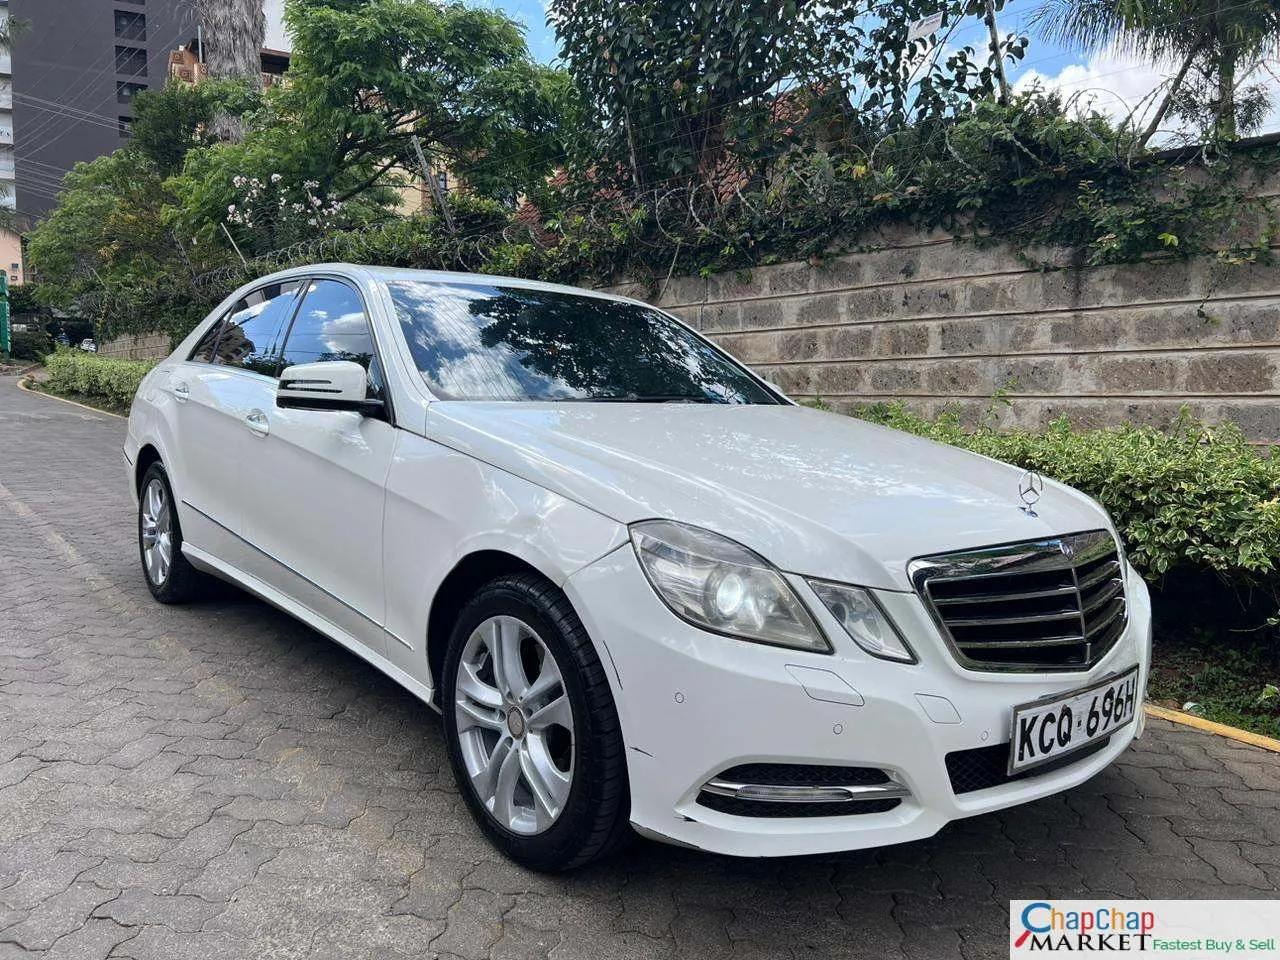 Mercedes Benz E350 for sale in kenya Cheapest You Pay 30% DEPOSIT hire purchase installments Trade in OK